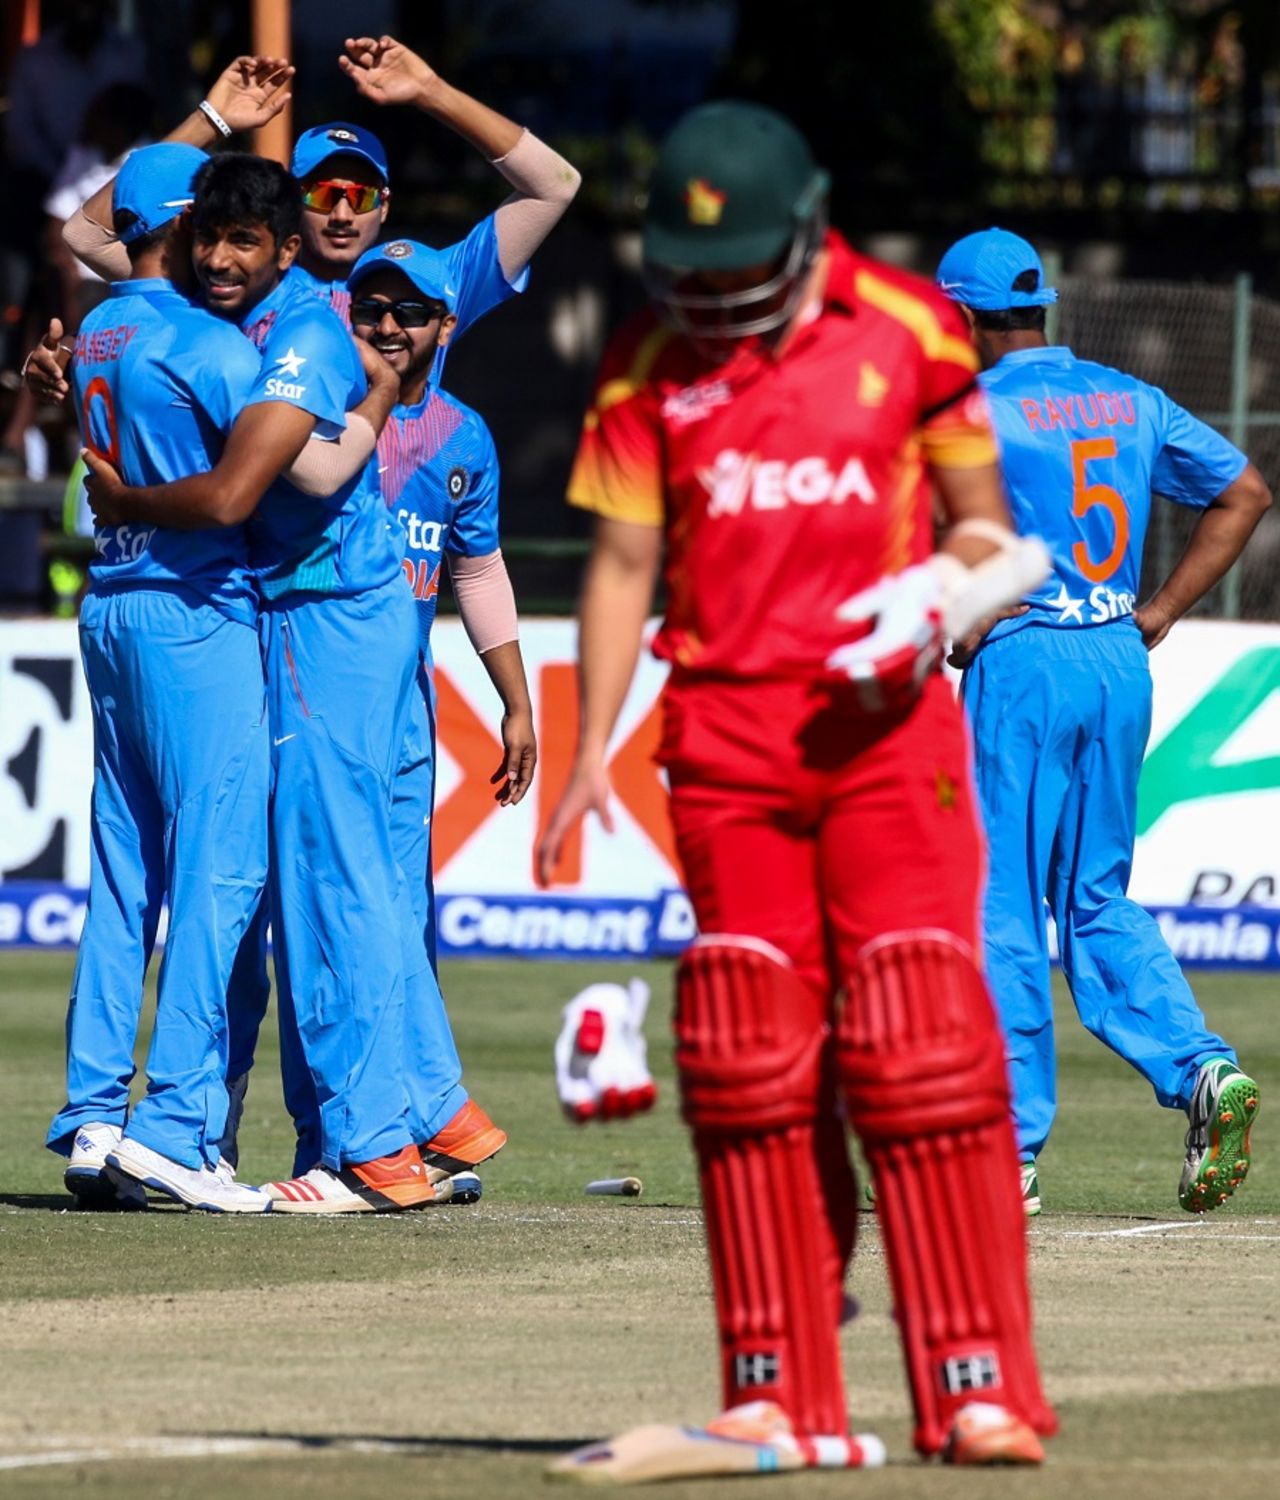 Jasprit Bumrah celebrates with team-mates after picking up a wicket, Zimbabwe v India, 2nd T20I, Harare, June 20, 2016